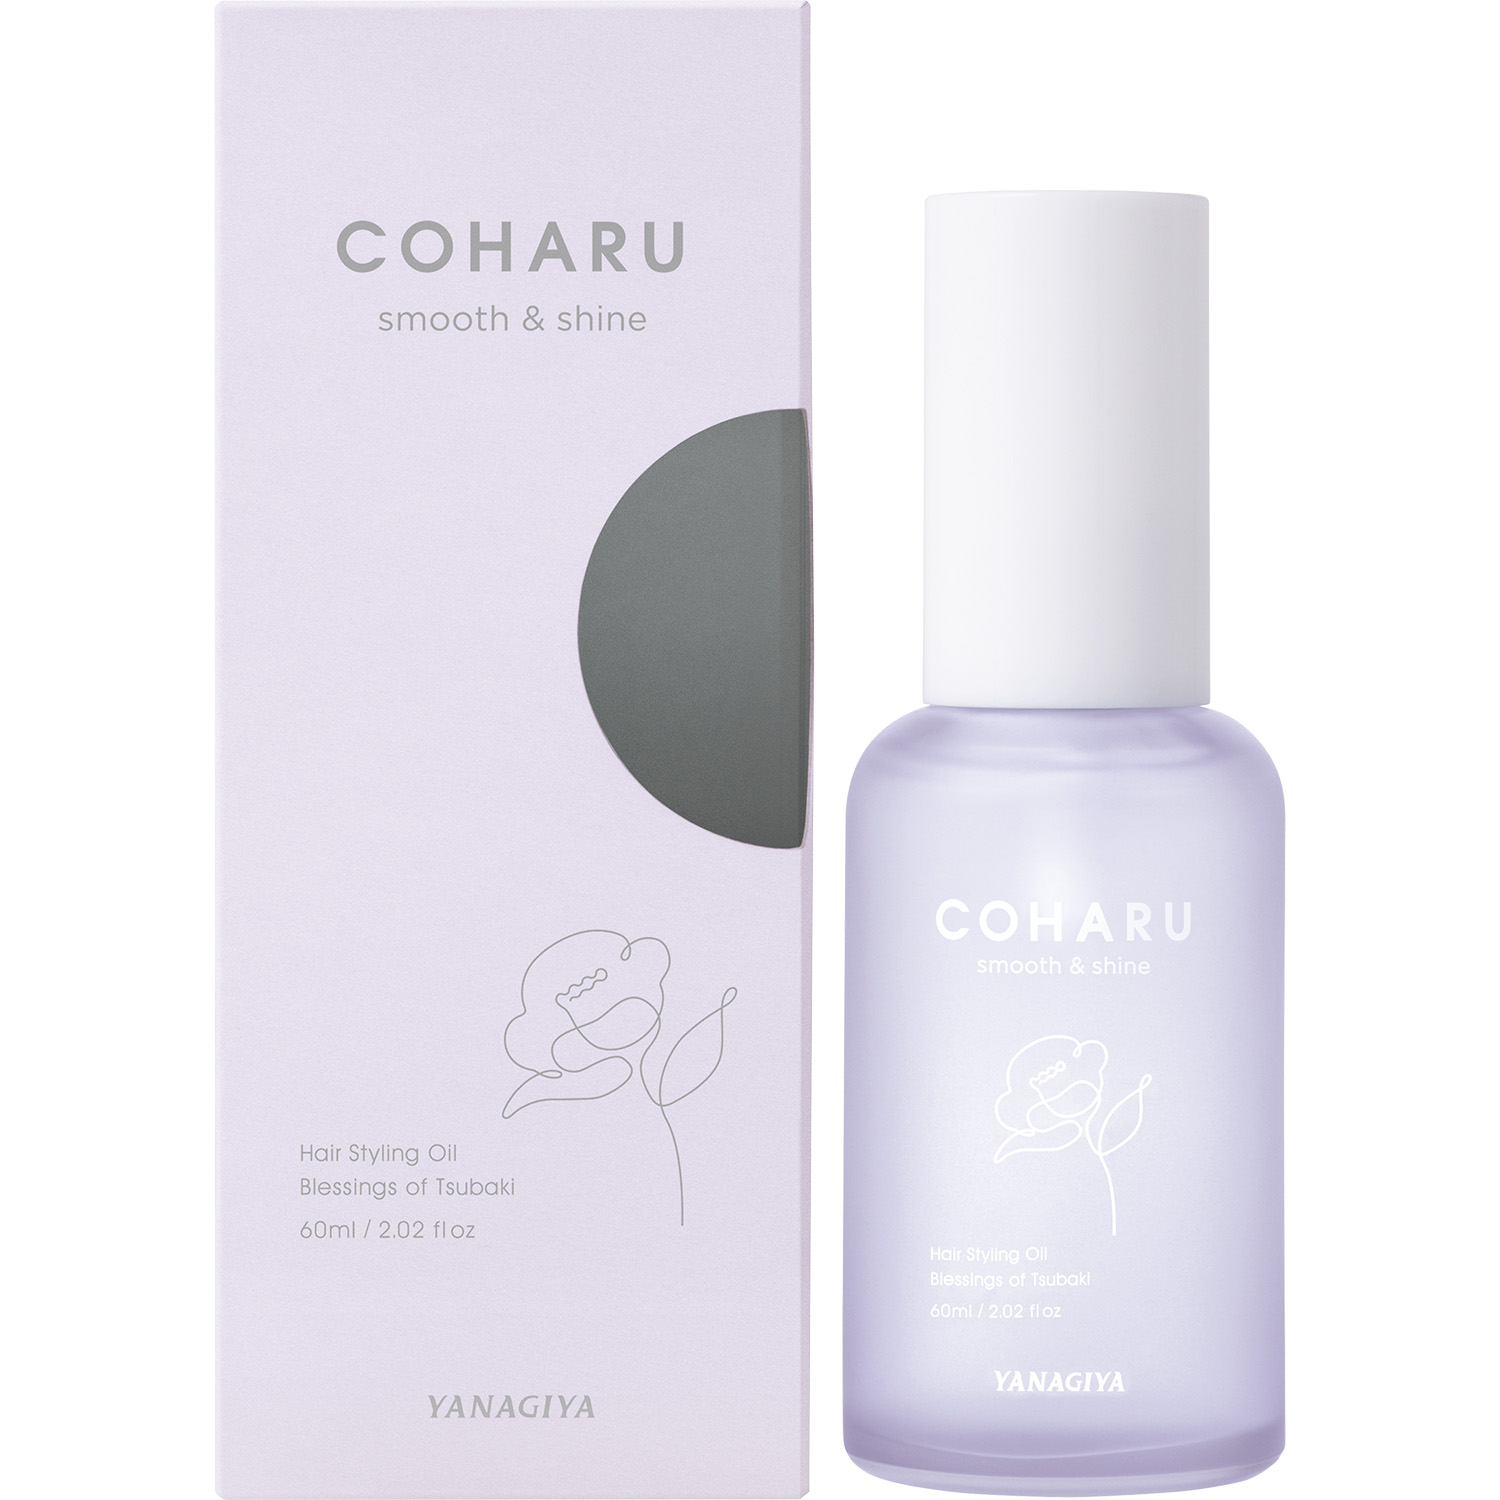 COHARU hair styling oil <smooth & shine>